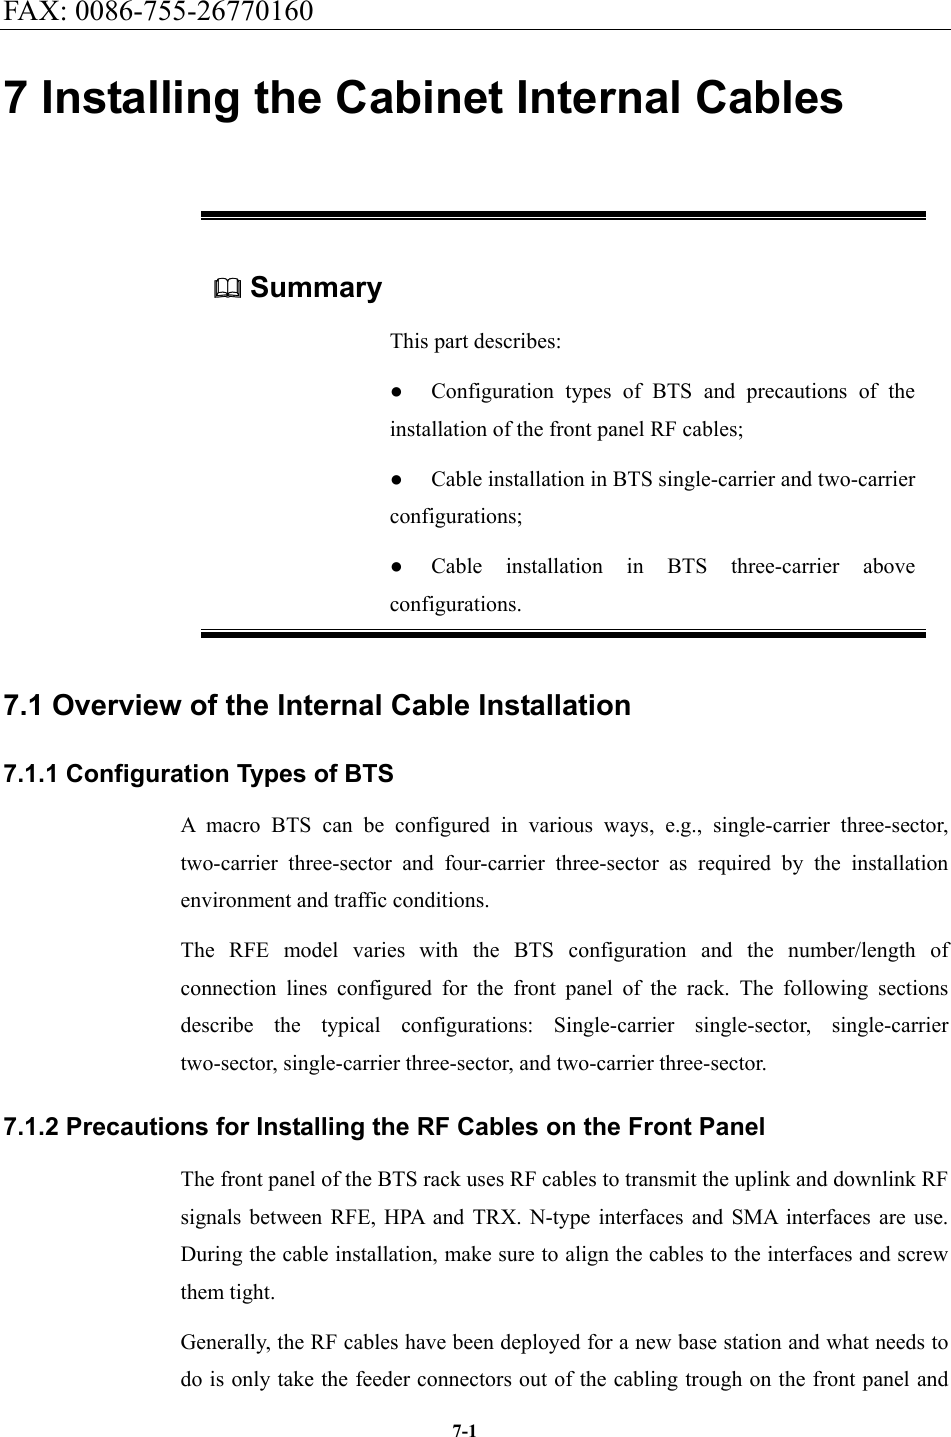 FAX: 0086-755-26770160  7-1 7 Installing the Cabinet Internal Cables  Summary This part describes: ●  Configuration types of BTS and precautions of the installation of the front panel RF cables; ●  Cable installation in BTS single-carrier and two-carrier configurations; ●  Cable installation in BTS three-carrier above configurations. 7.1 Overview of the Internal Cable Installation   7.1.1 Configuration Types of BTS A macro BTS can be configured in various ways, e.g., single-carrier three-sector, two-carrier three-sector and four-carrier three-sector as required by the installation environment and traffic conditions.   The RFE model varies with the BTS configuration and the number/length of connection lines configured for the front panel of the rack. The following sections describe the typical configurations: Single-carrier single-sector, single-carrier two-sector, single-carrier three-sector, and two-carrier three-sector. 7.1.2 Precautions for Installing the RF Cables on the Front Panel The front panel of the BTS rack uses RF cables to transmit the uplink and downlink RF signals between RFE, HPA and TRX. N-type interfaces and SMA interfaces are use. During the cable installation, make sure to align the cables to the interfaces and screw them tight.   Generally, the RF cables have been deployed for a new base station and what needs to do is only take the feeder connectors out of the cabling trough on the front panel and 